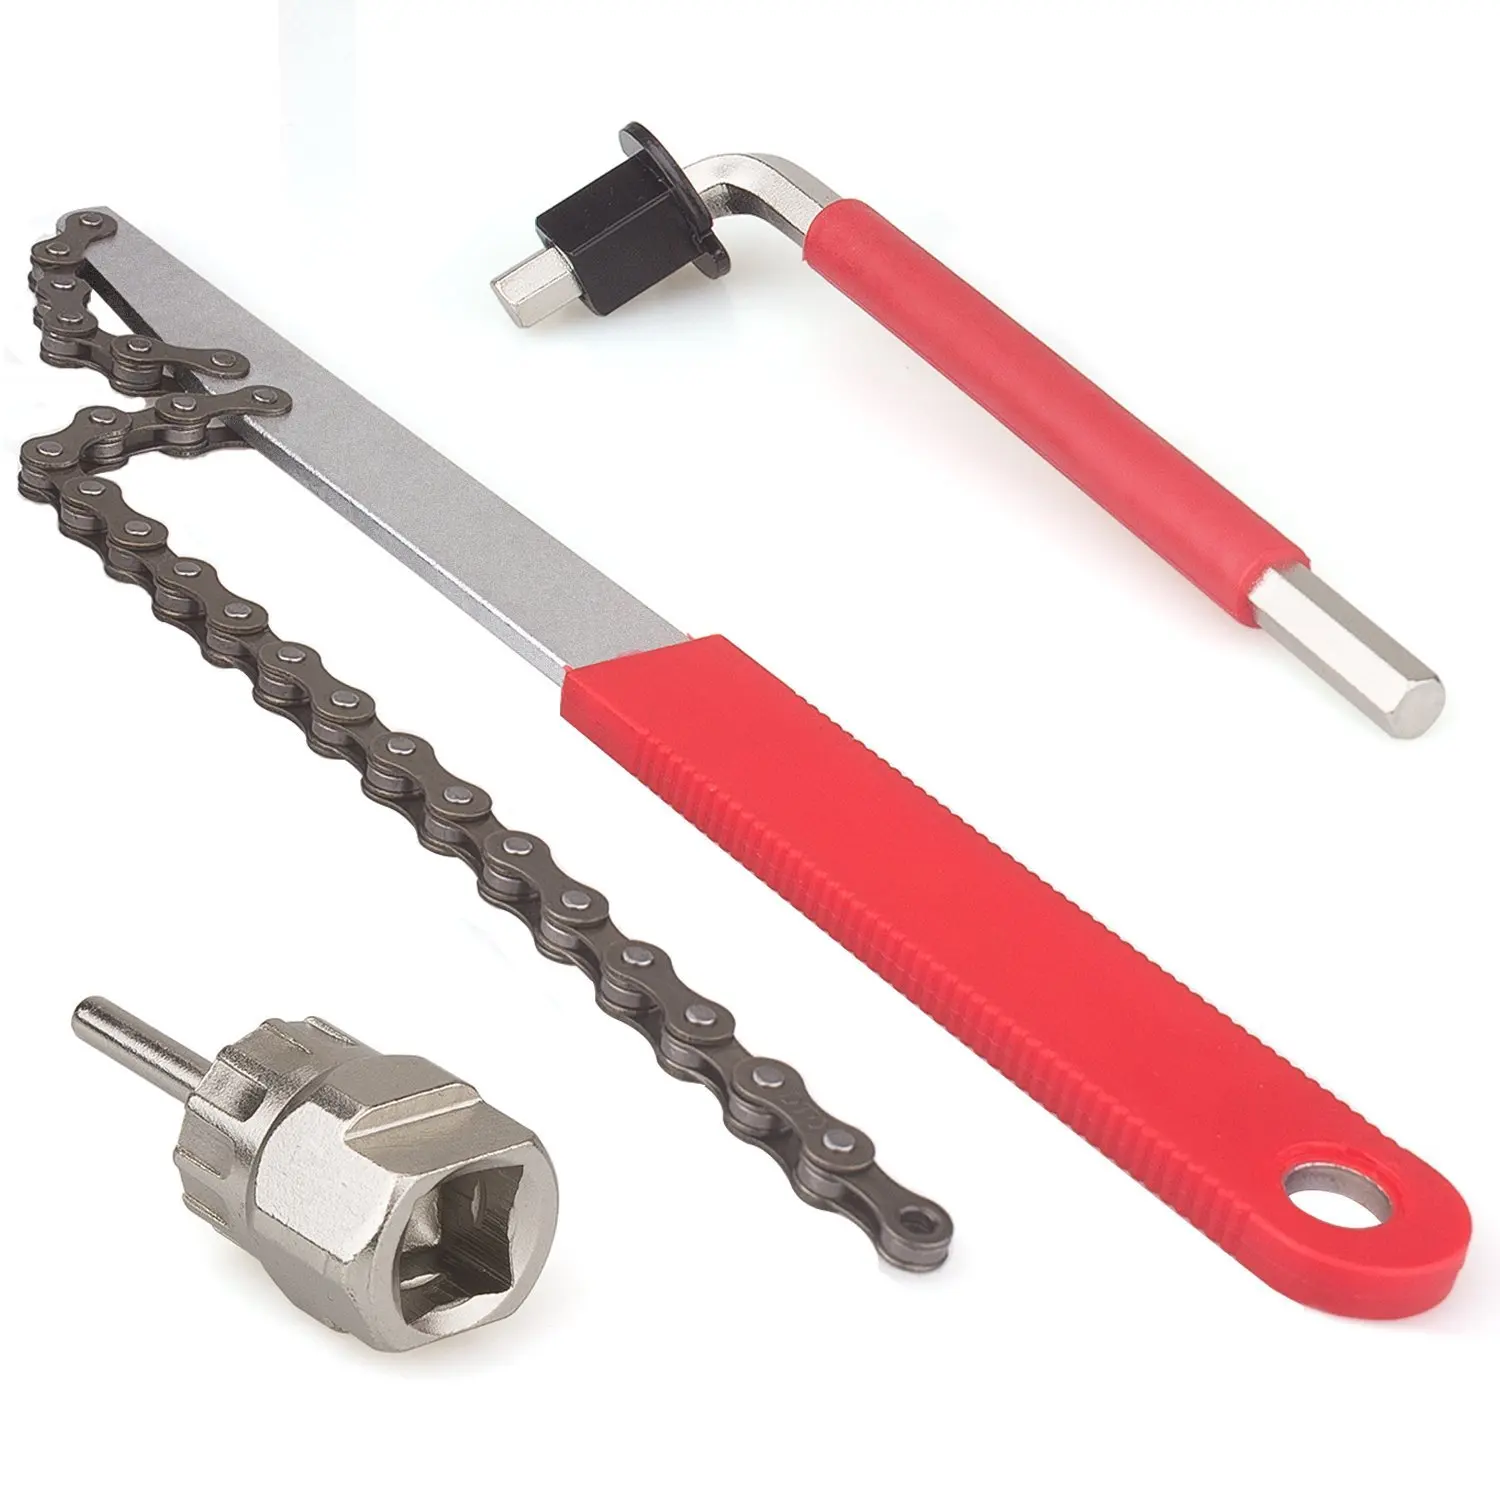 

Bike Cassette Removal Tool with Chain whip and Auxiliary Wrench,Bicycle Sprocket Removal Tools Sprocket Remover